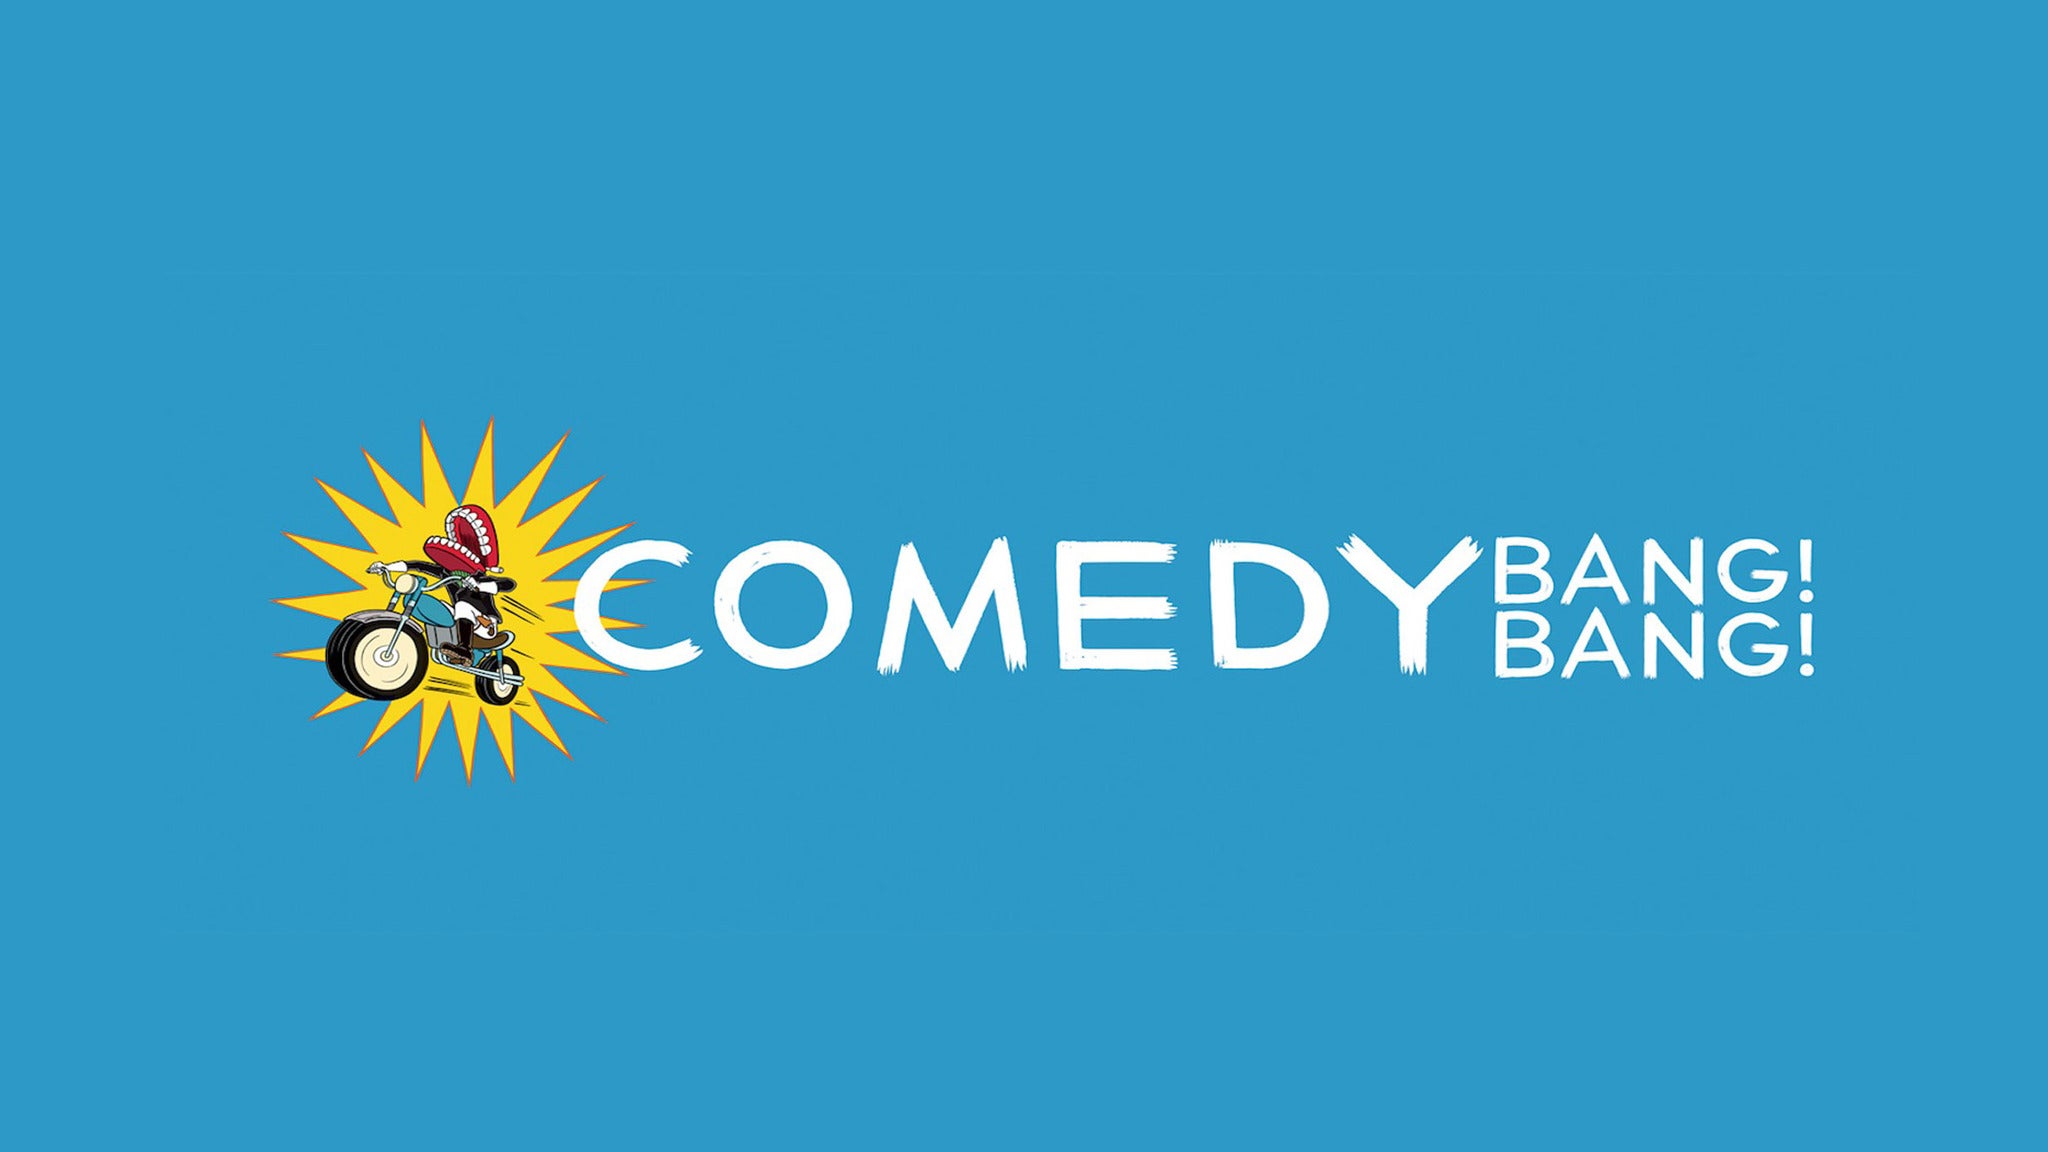 Comedy Bang! Bang! Live! Starring Scott Aukerman w/ guests in Washington promo photo for Artist presale offer code